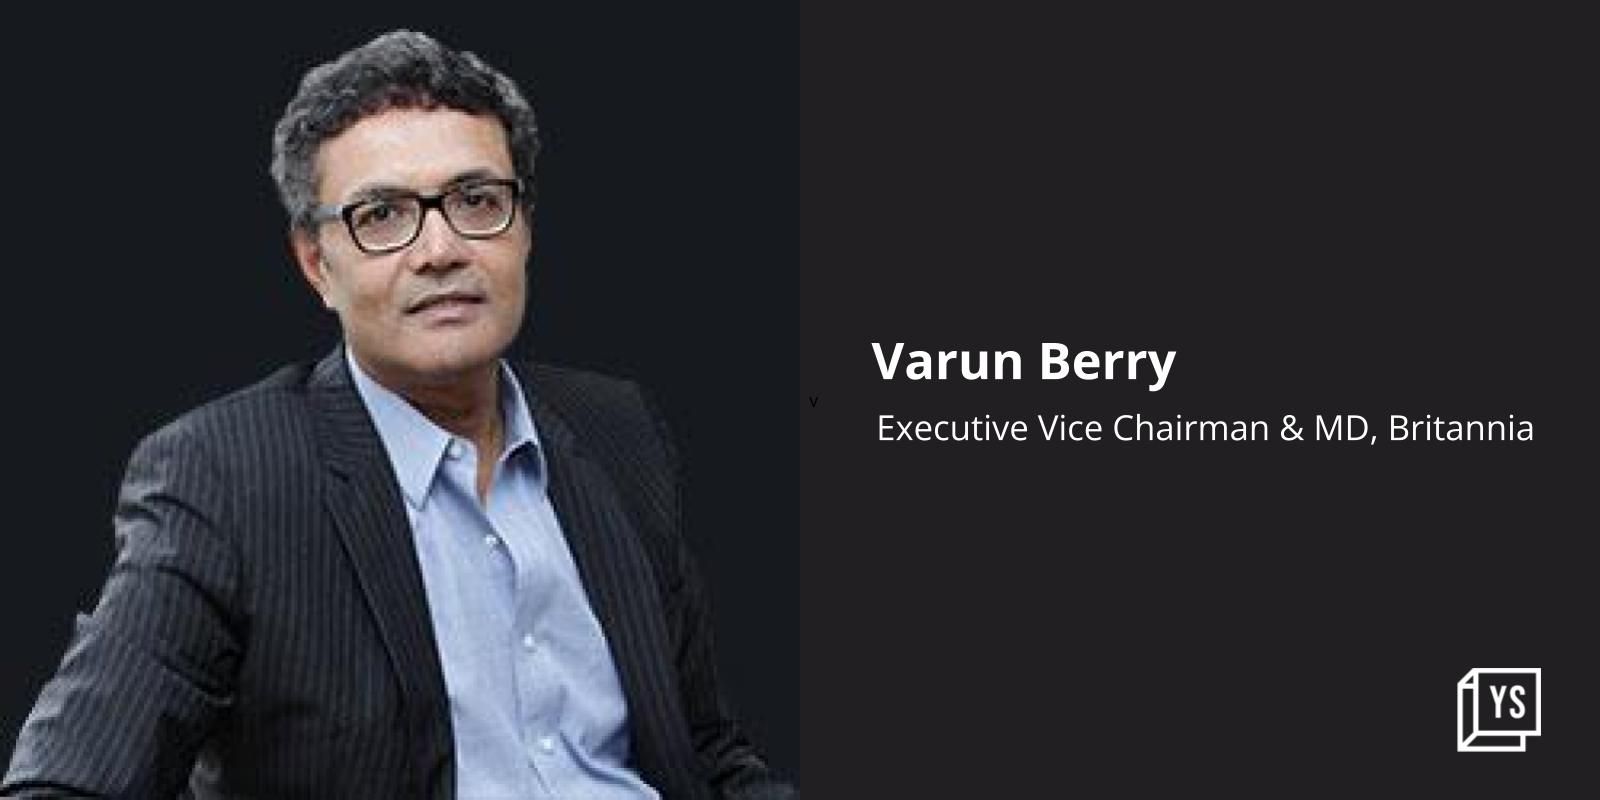 After helming Britannia, Varun Berry to steer Go First as Chairman